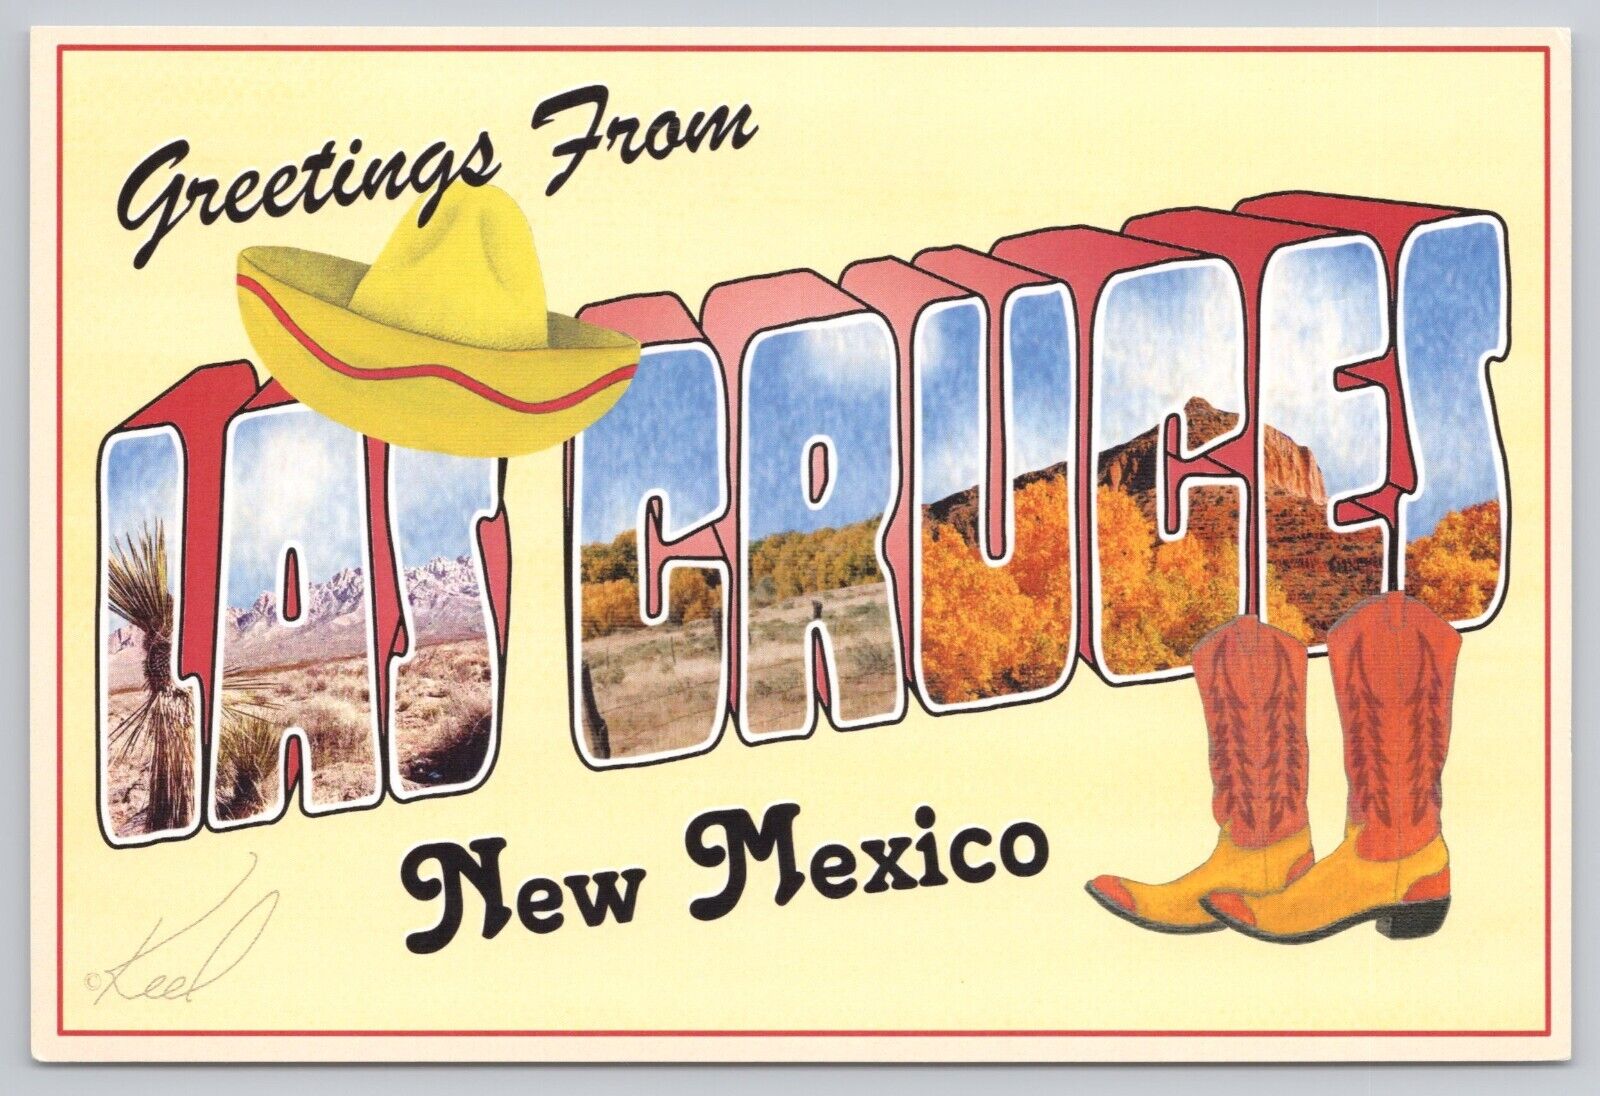 Las Cruces New Mexico, Large Letter Greetings, Vintage Postcard